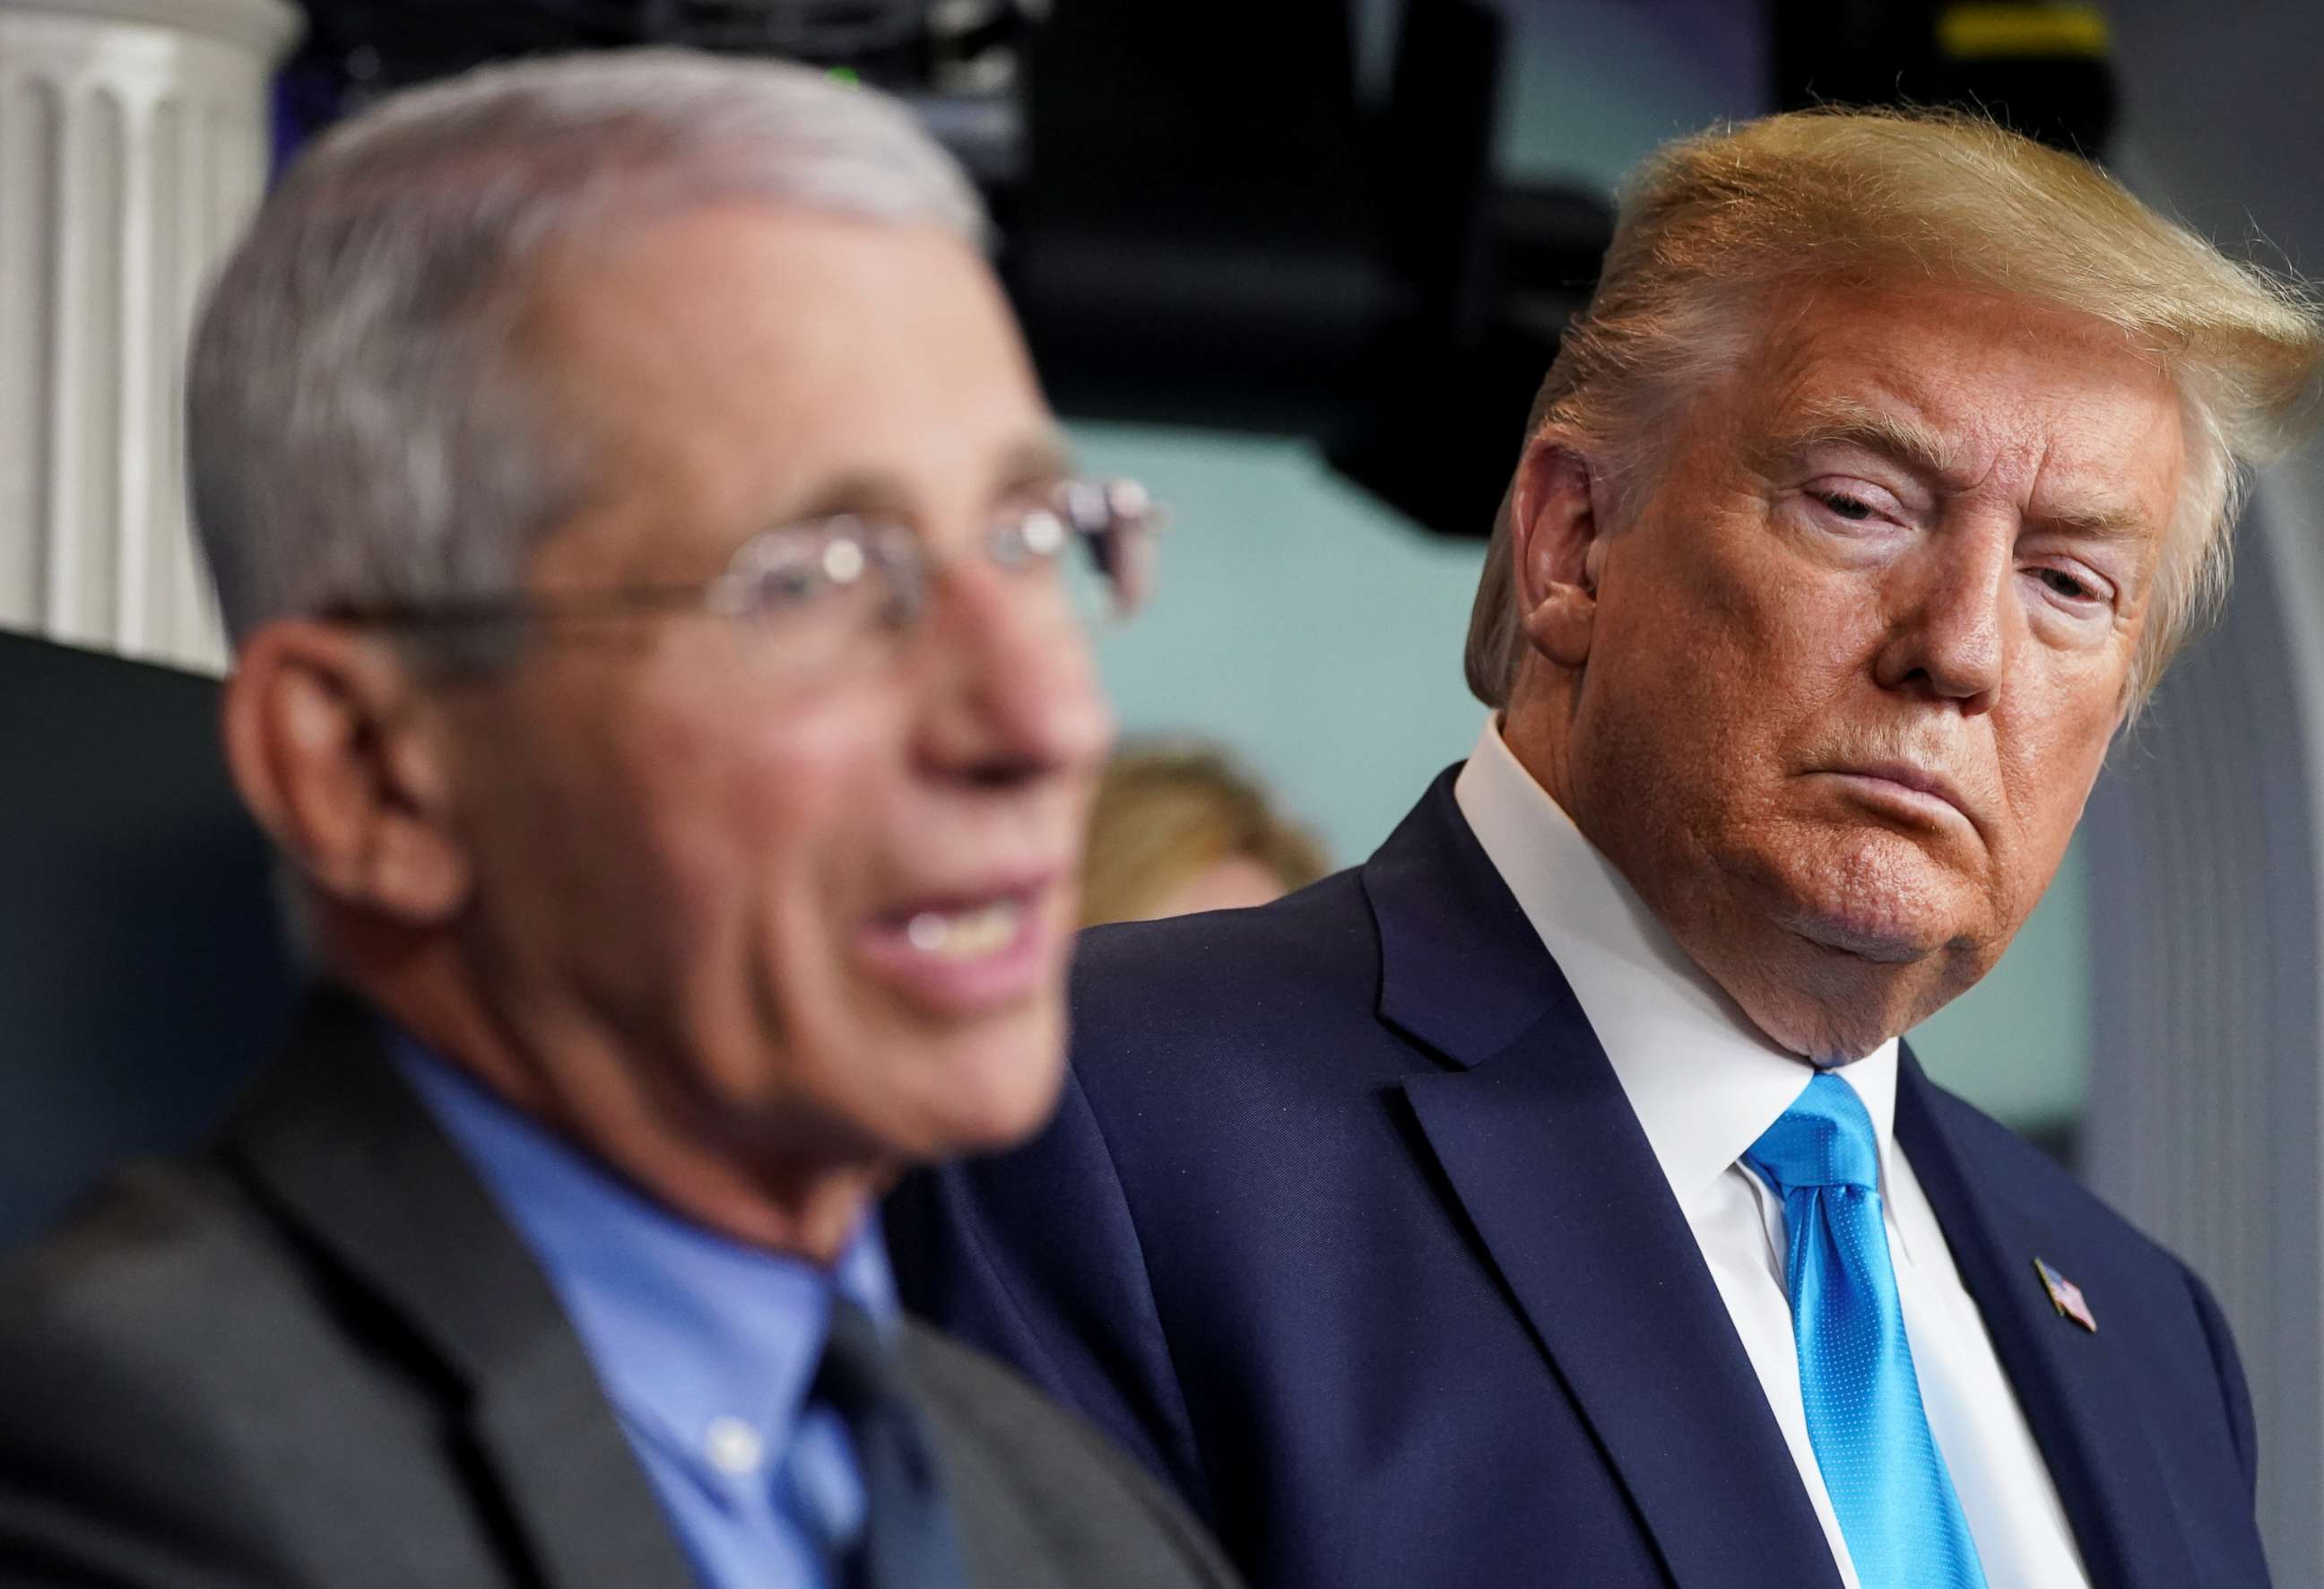 PHOTO: President Donald Trump listens as Dr. Anthony Fauci, director of the National Institute of Allergy and Infectious Diseases, addresses the daily coronavirus task force briefing at the White House in Washington, April 7, 2020.